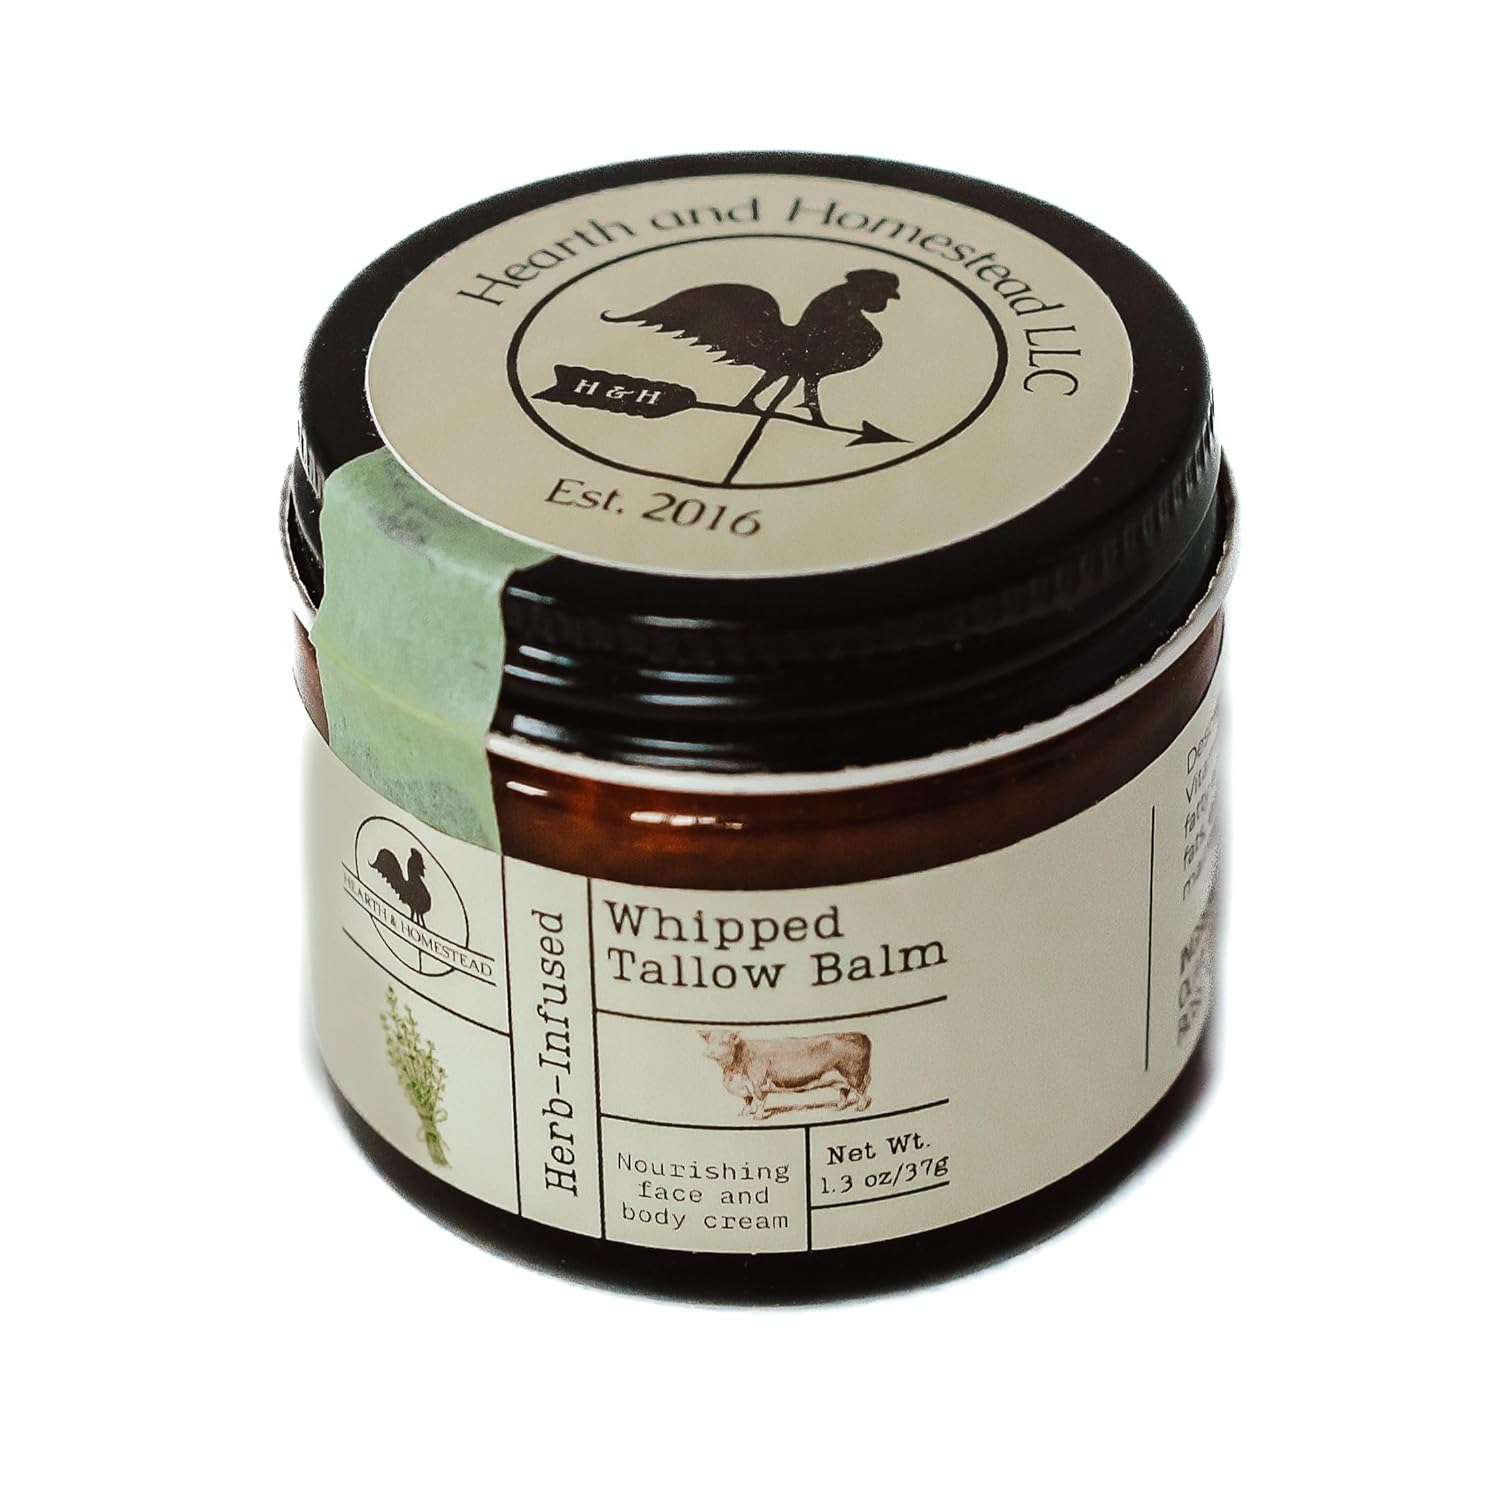 Hearth and Homestead: Handmade Whipped Tallow Balm (Unscented/Herb-Infused) - Organic Body Butter with Infused Olive Oil, for Eczema, Rosacea, Baby - 1.3 oz